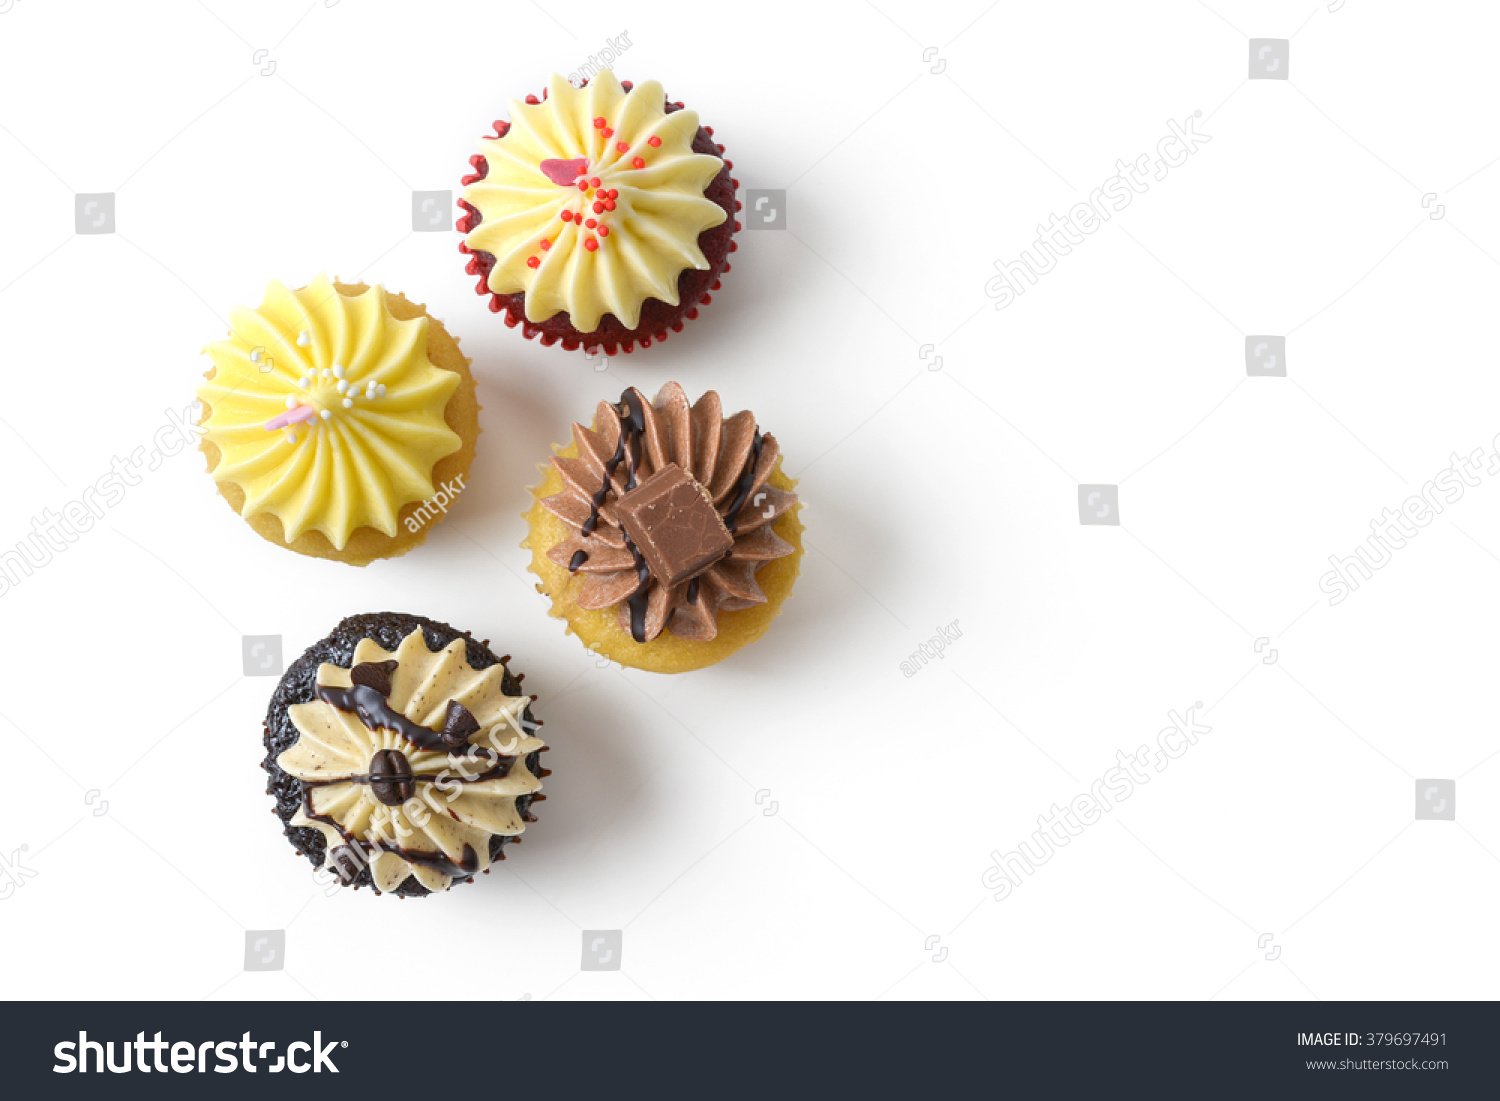 top view of cupcake on white background #379697491